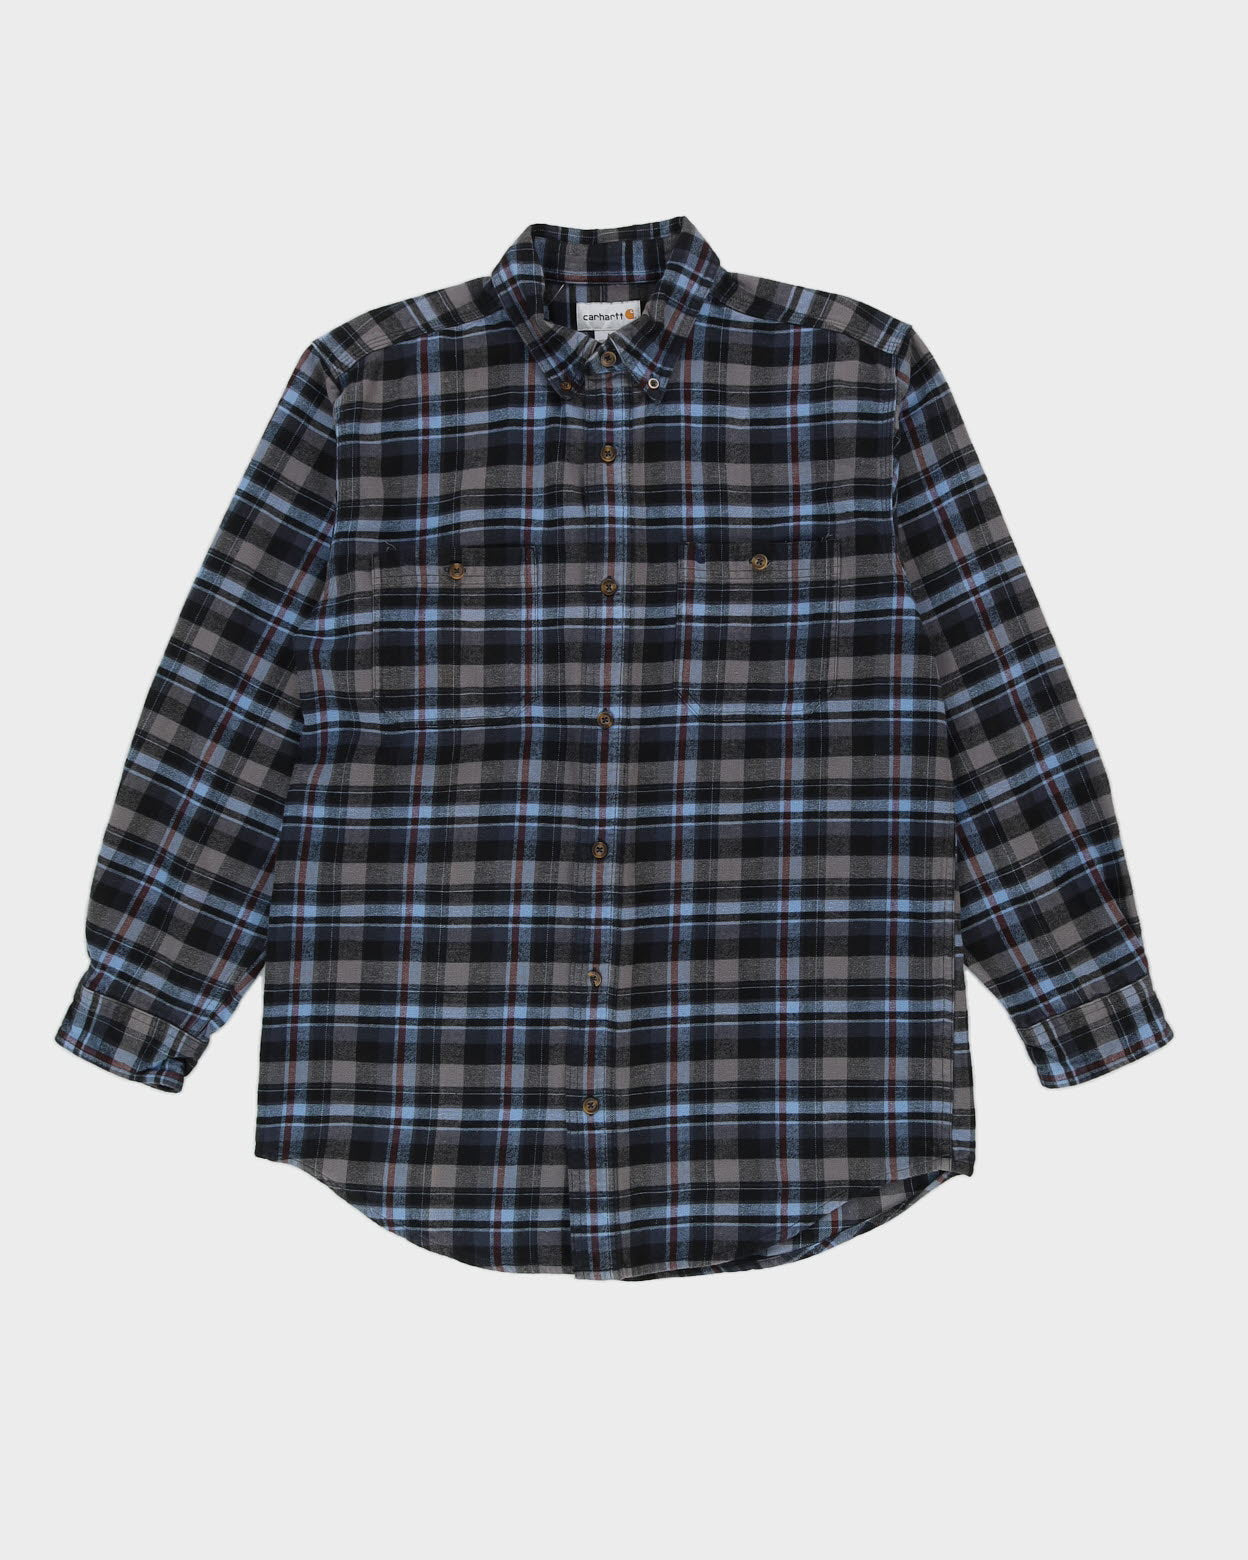 Carhartt Blue Check Patterned Flannel Shirt - L